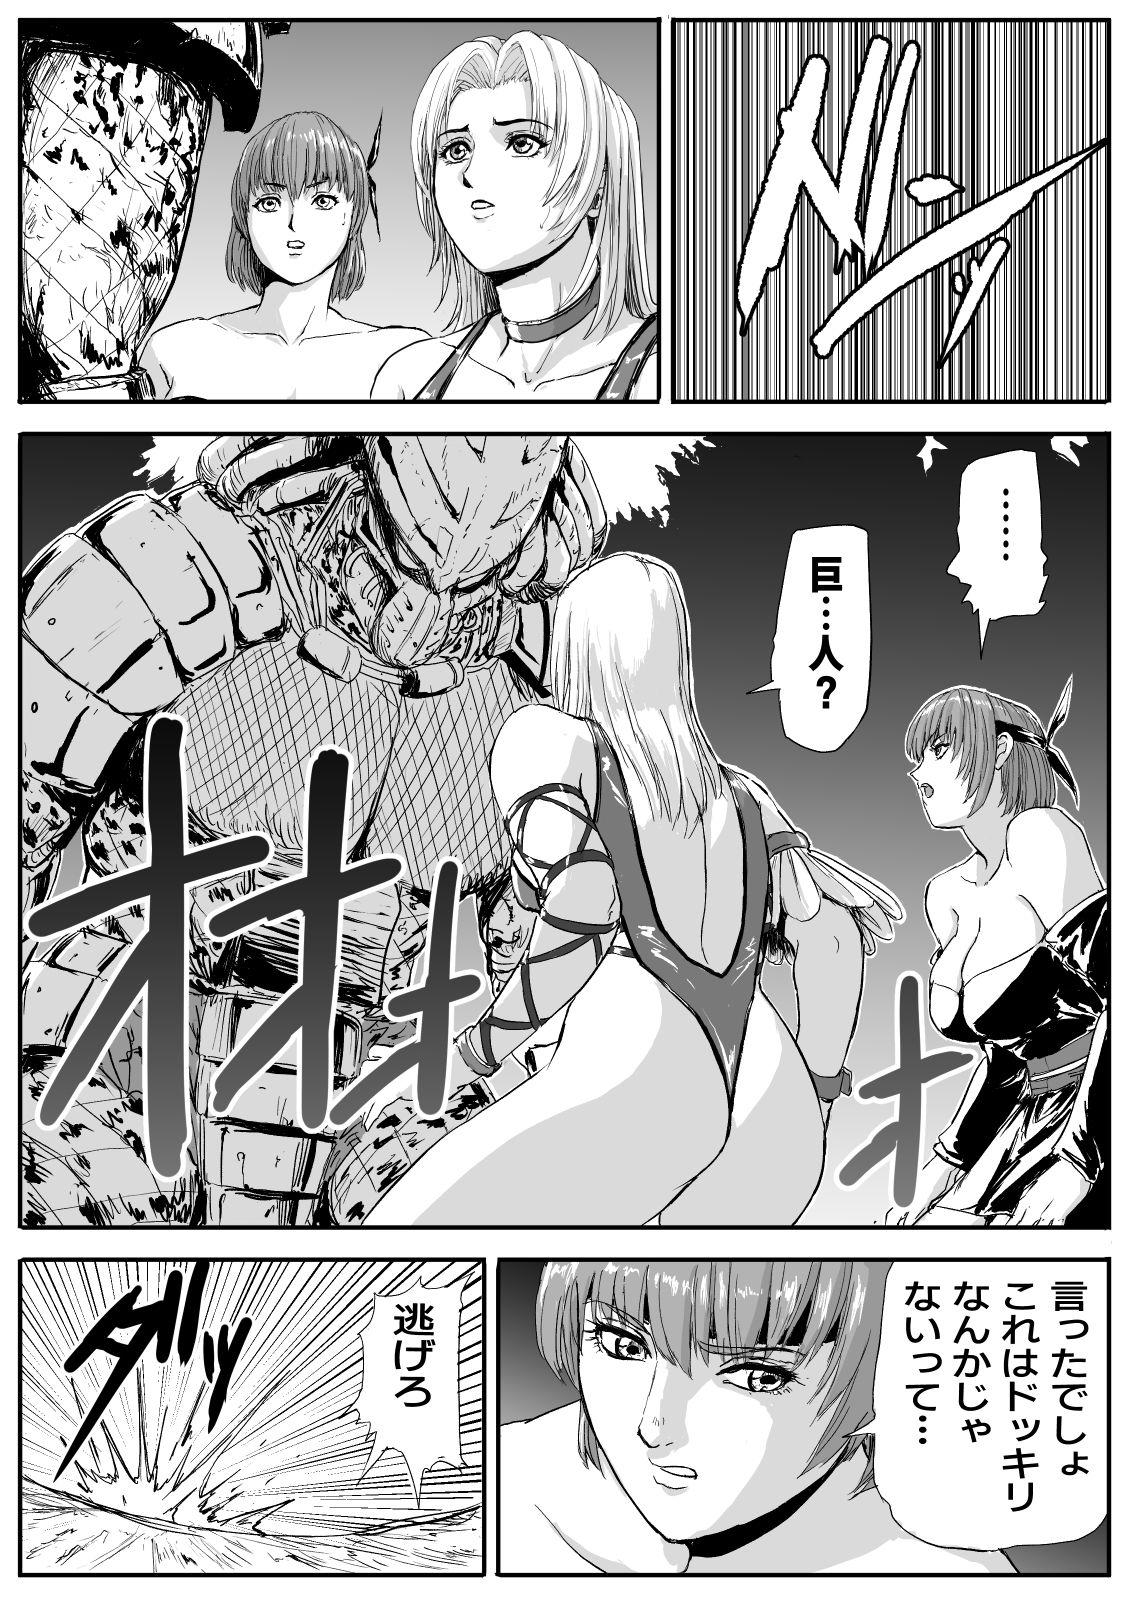 Picked Up DOA vs. Predator 2: The Human Onahole - Dead or alive Predator Punished - Page 2